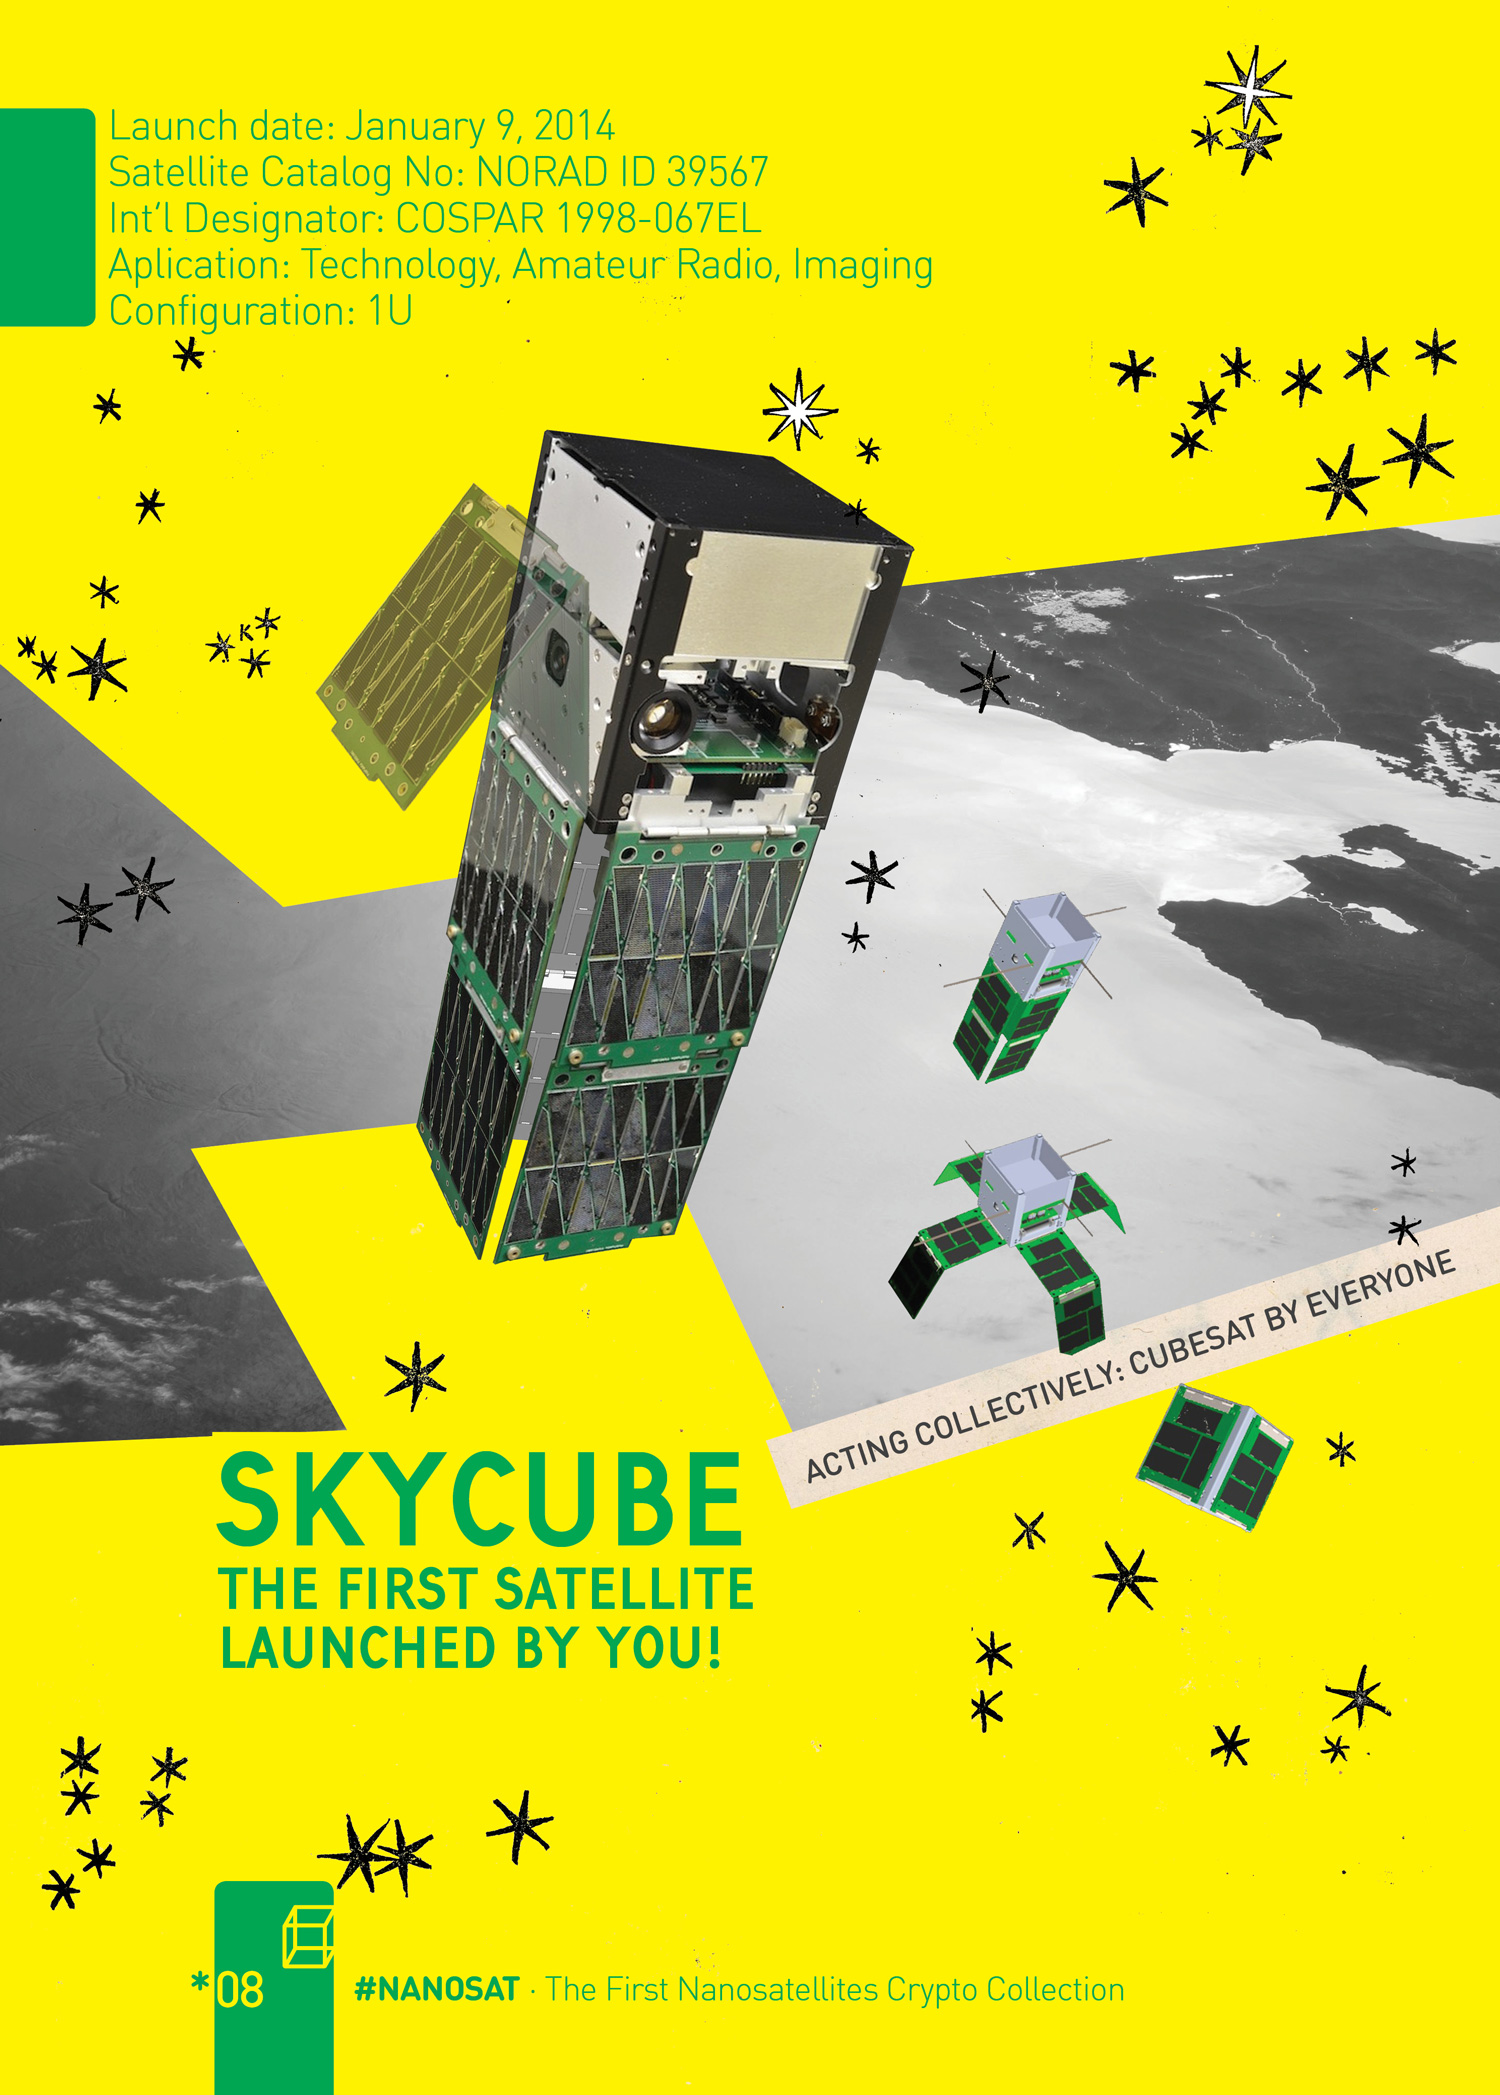 SKYCUBE The First Satellite Launched by You!